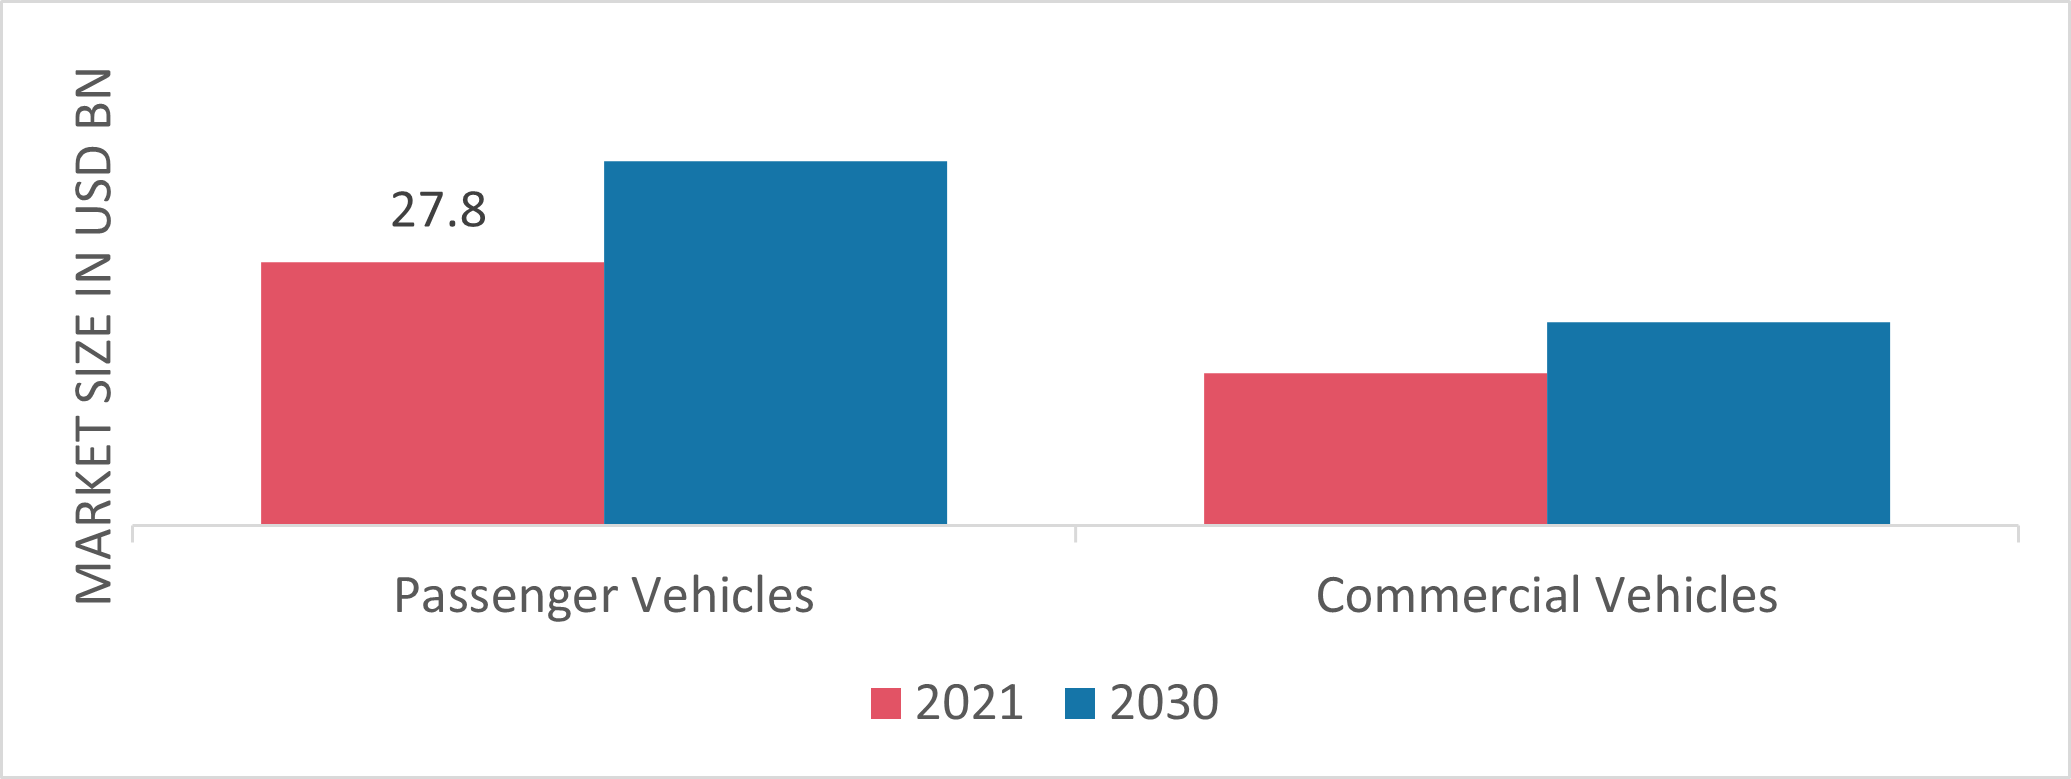 Automotive Thermal Management System Market, by Vehicle Type, 2021 & 2030 (USD Million)